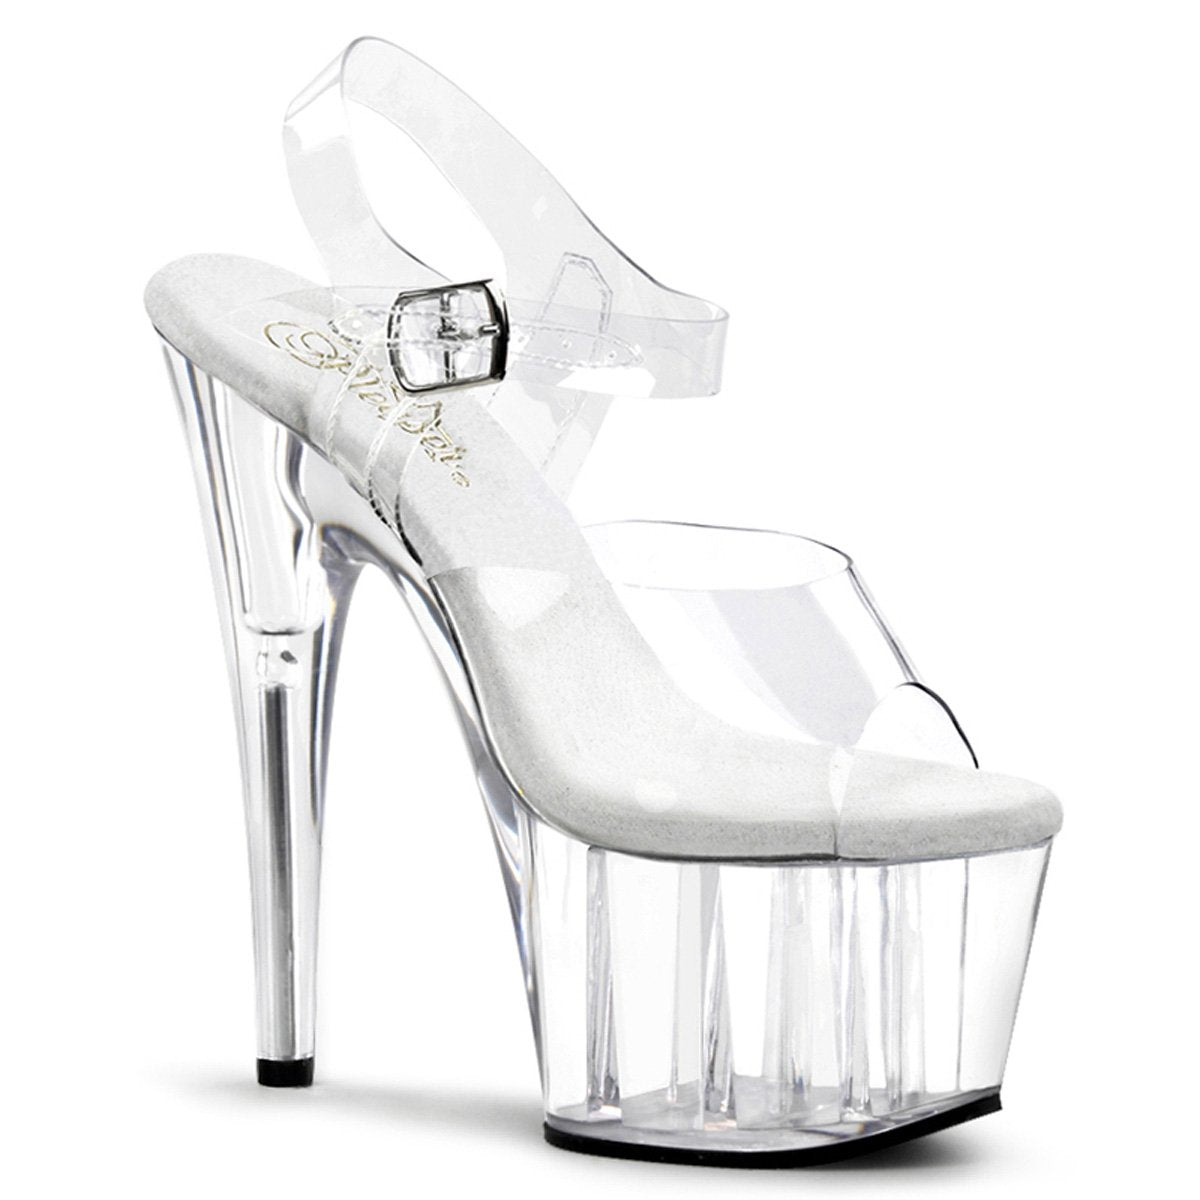 The right side of the 7" Adore Clear Ankle Strap Heels.